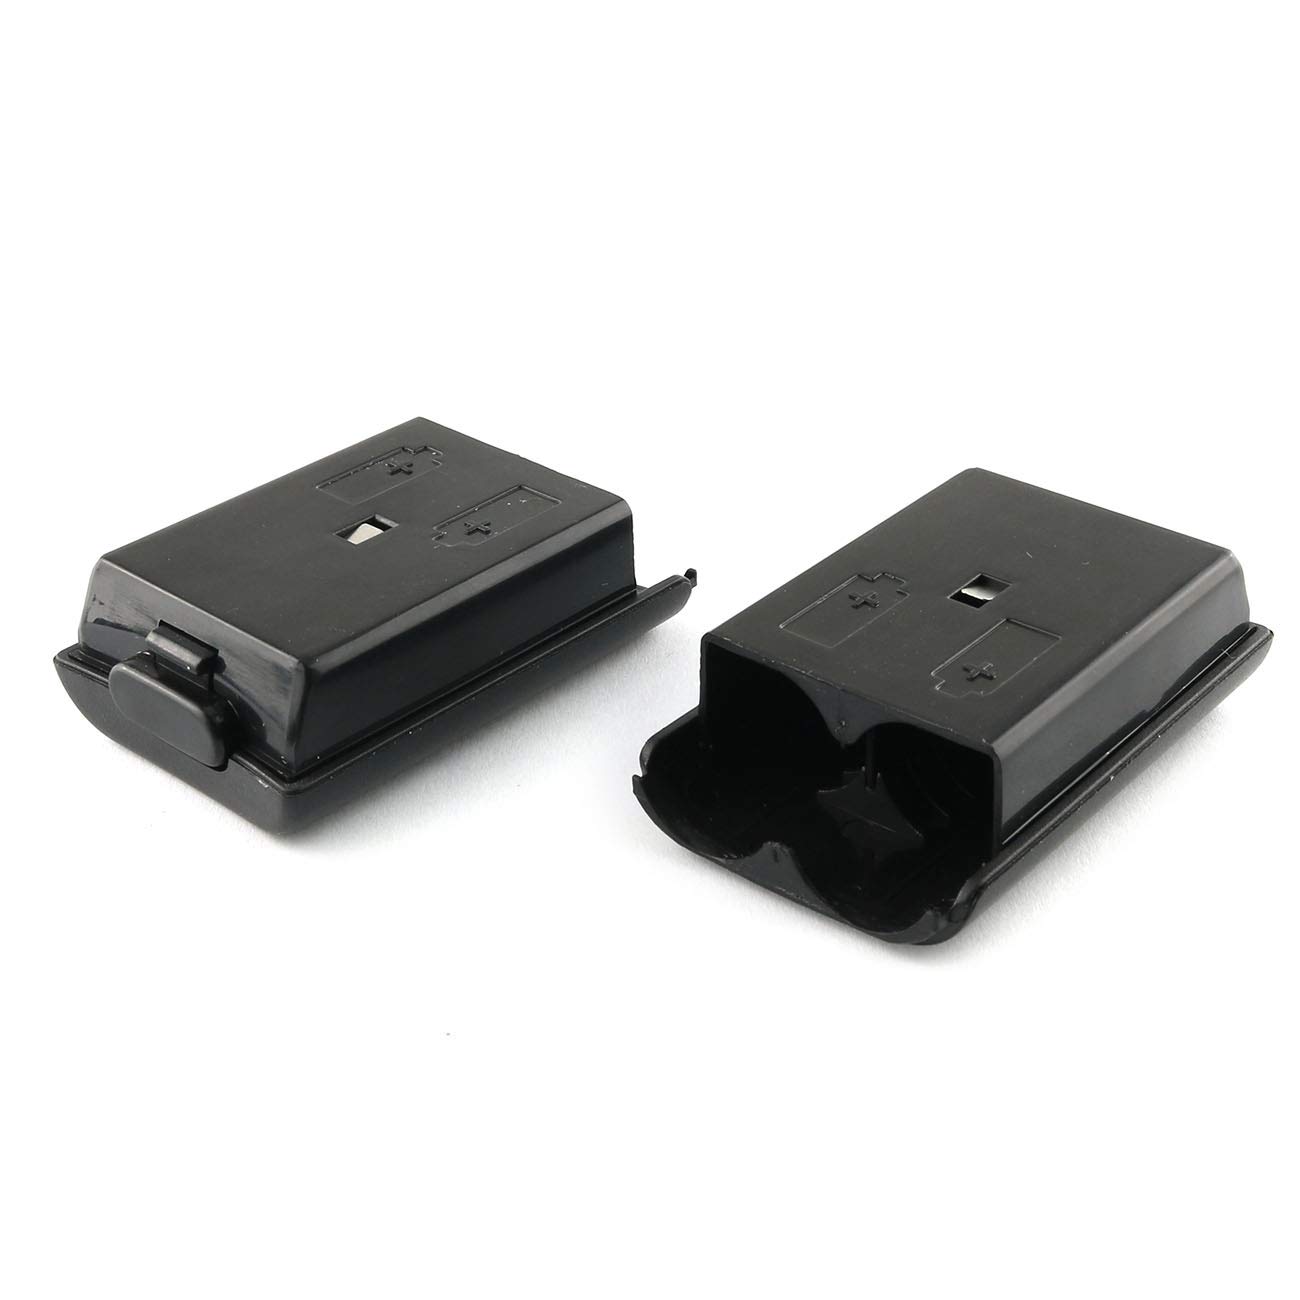 E-outstanding Battery Case 2PCS Black AA Battery Back Covers Holders Shells for Xbox 360 Wireless Controller